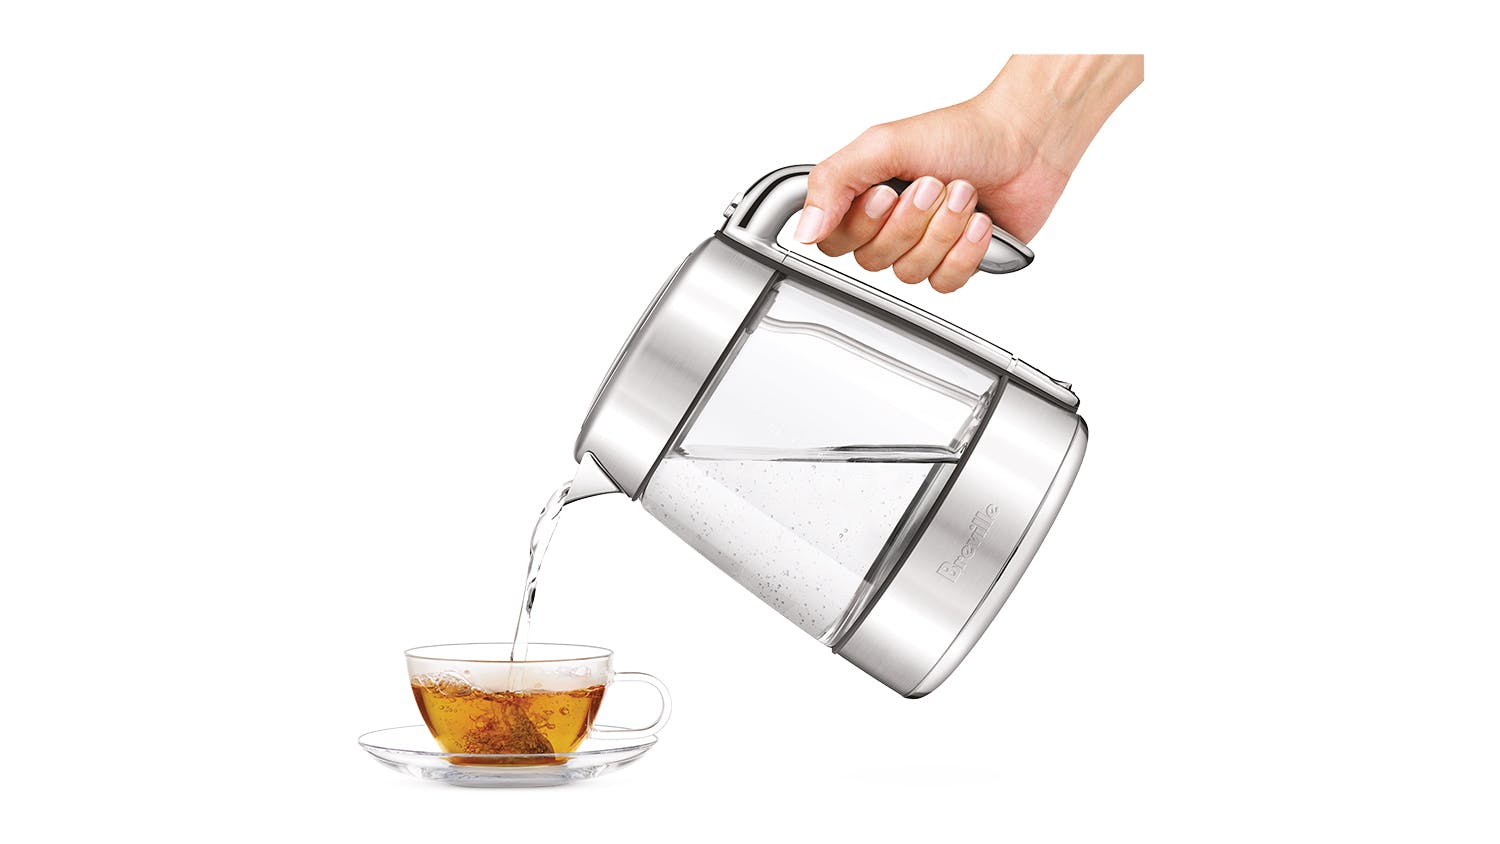 Breville the Crystal Luxe 1.7L Glass Kettle - Brushed Stainless Steel (BKE765BSS)